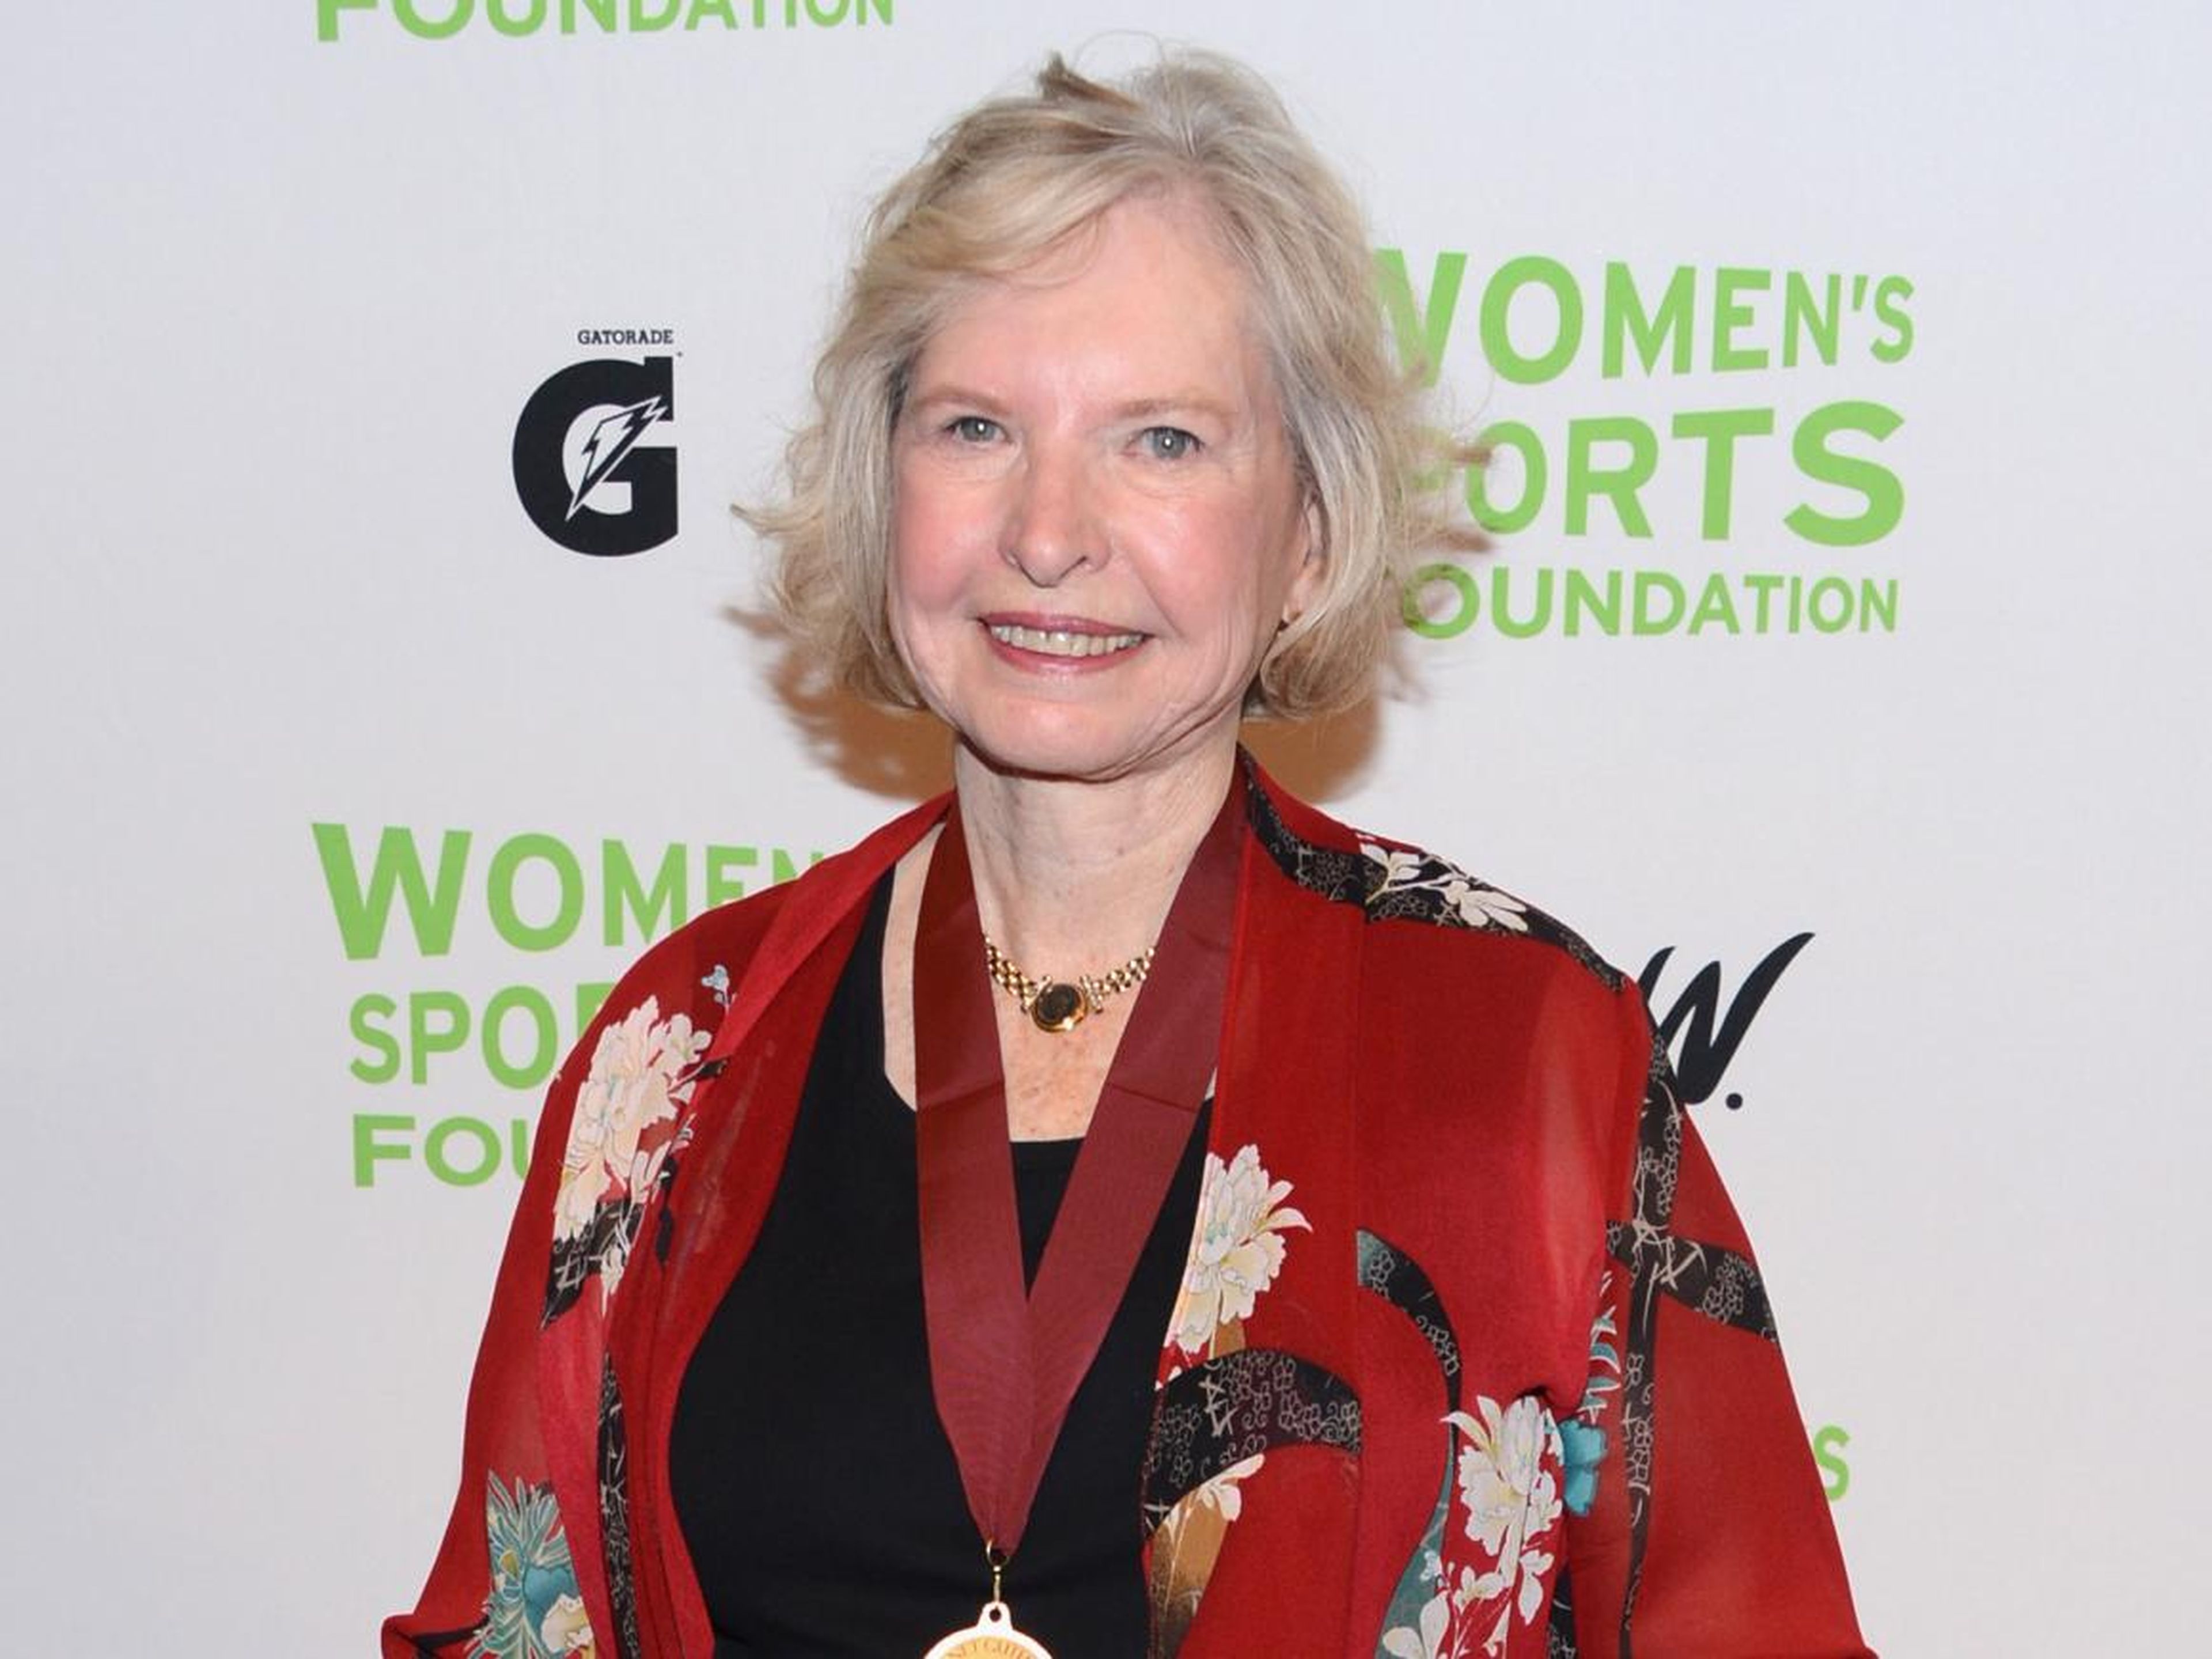 Janet Guthrie was the first woman to compete in the Daytona 500 in 1977.